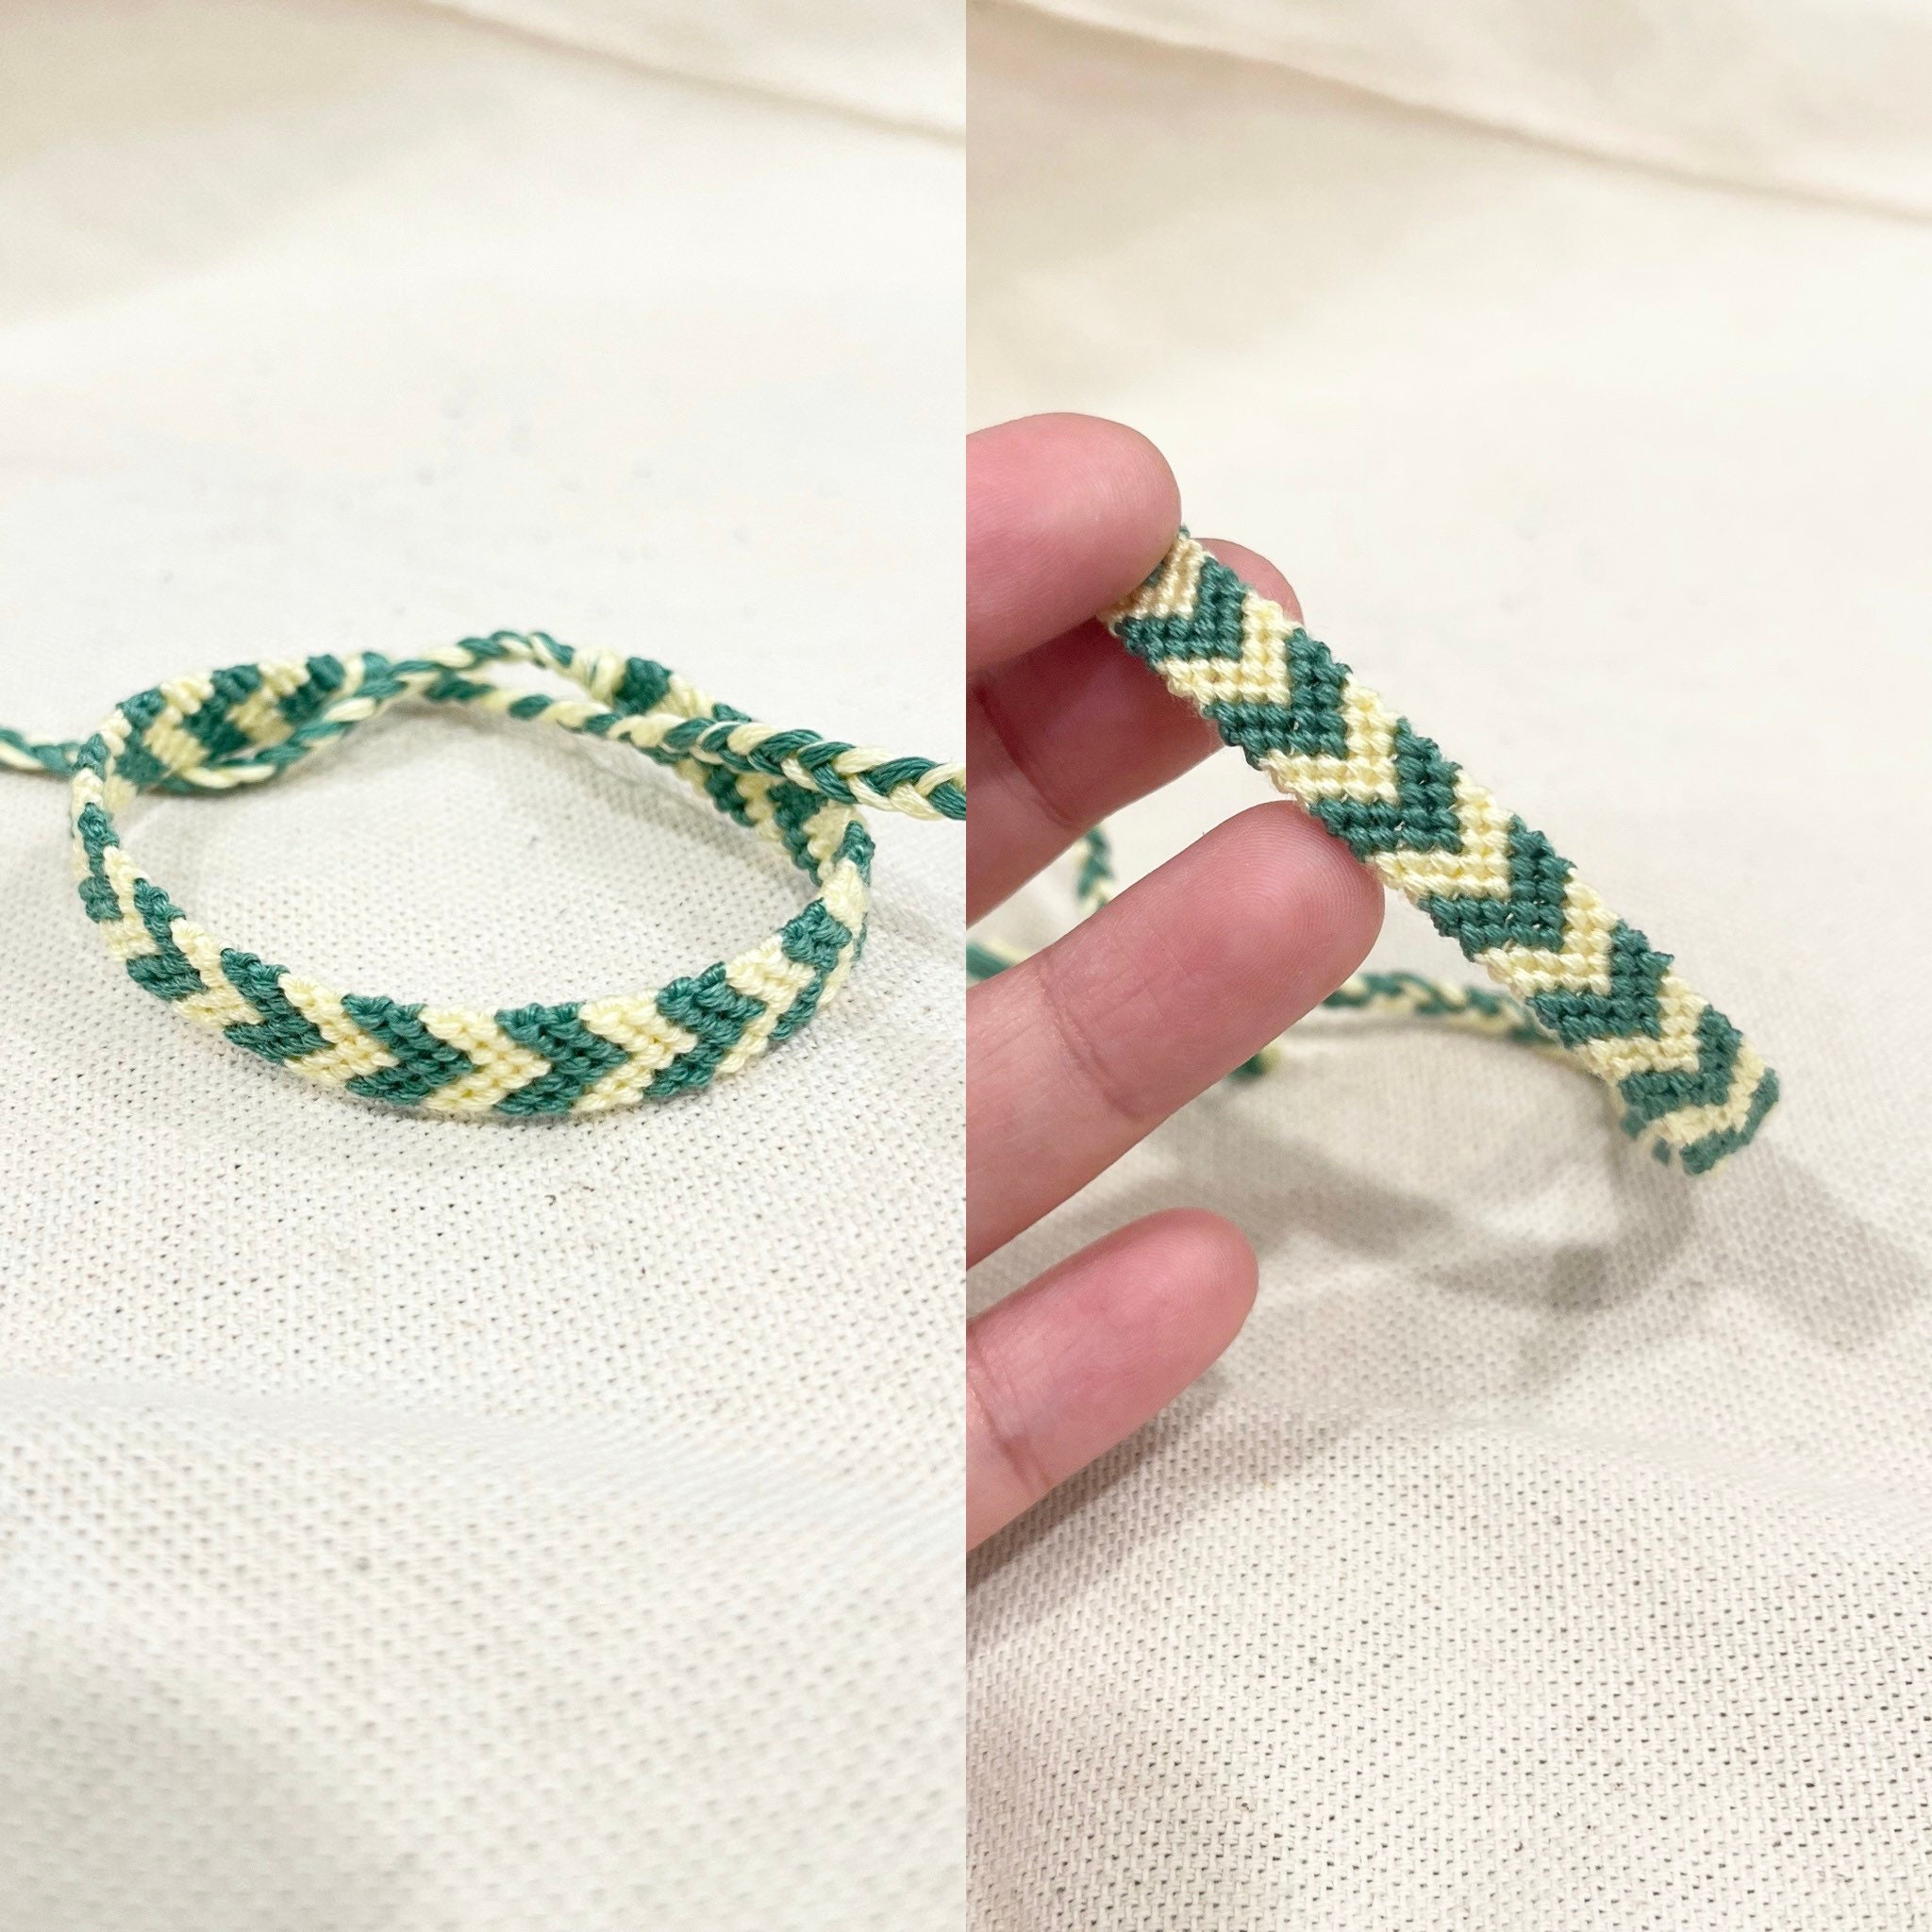 Two-Colored Square Knot Friendship Bracelet Tutorial [CC] - YouTube